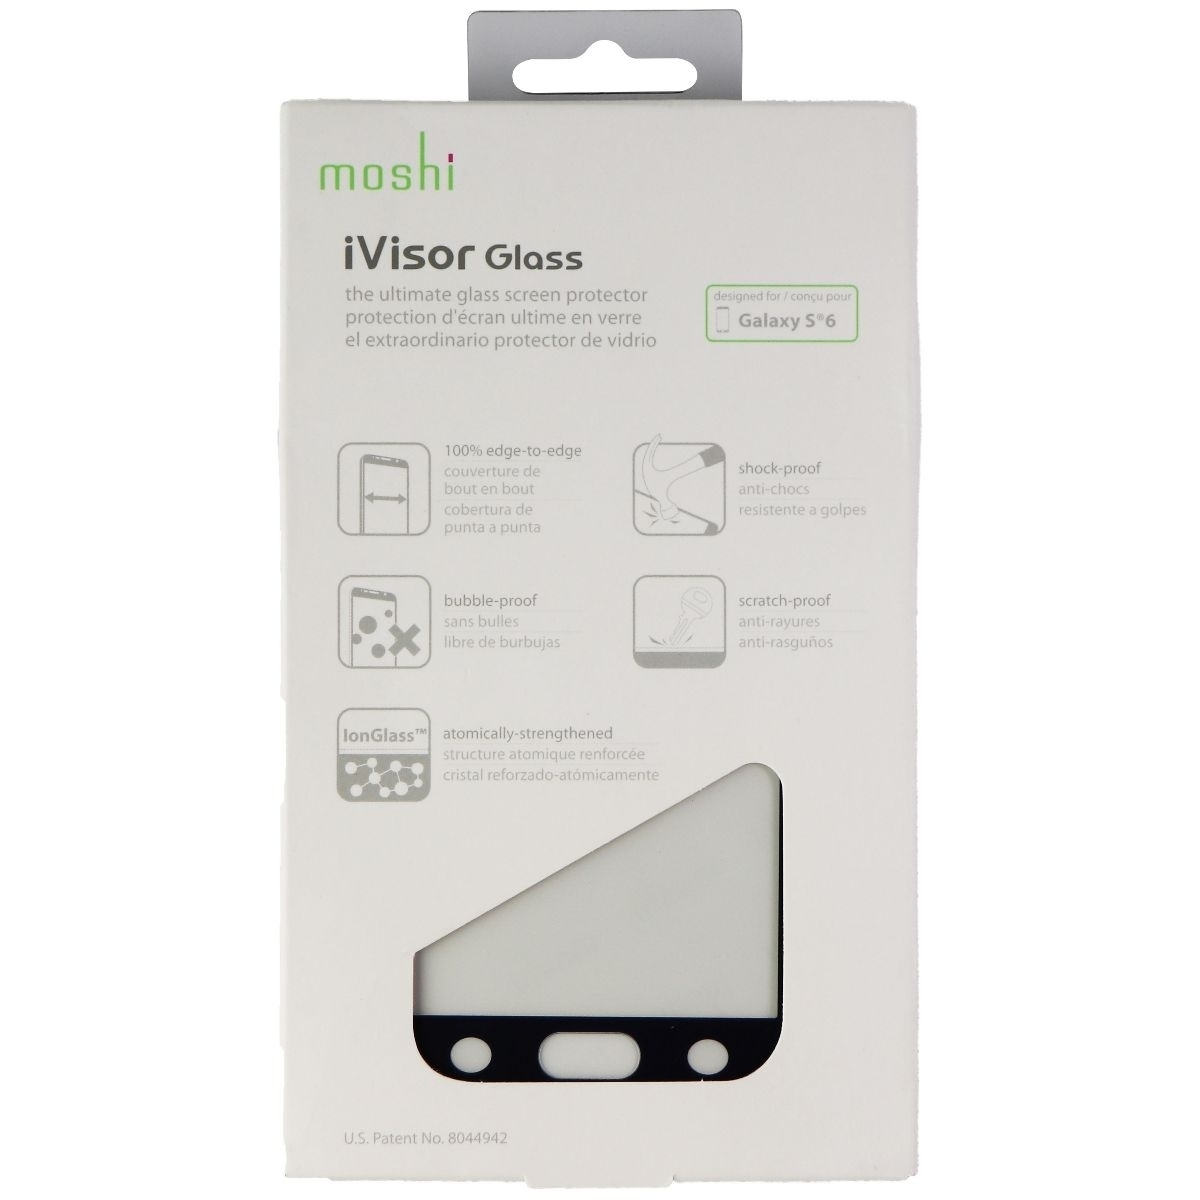 Moshi IVisor Tempered Glass Screen Protector For Samsung Galaxy S6 - Clear/Black